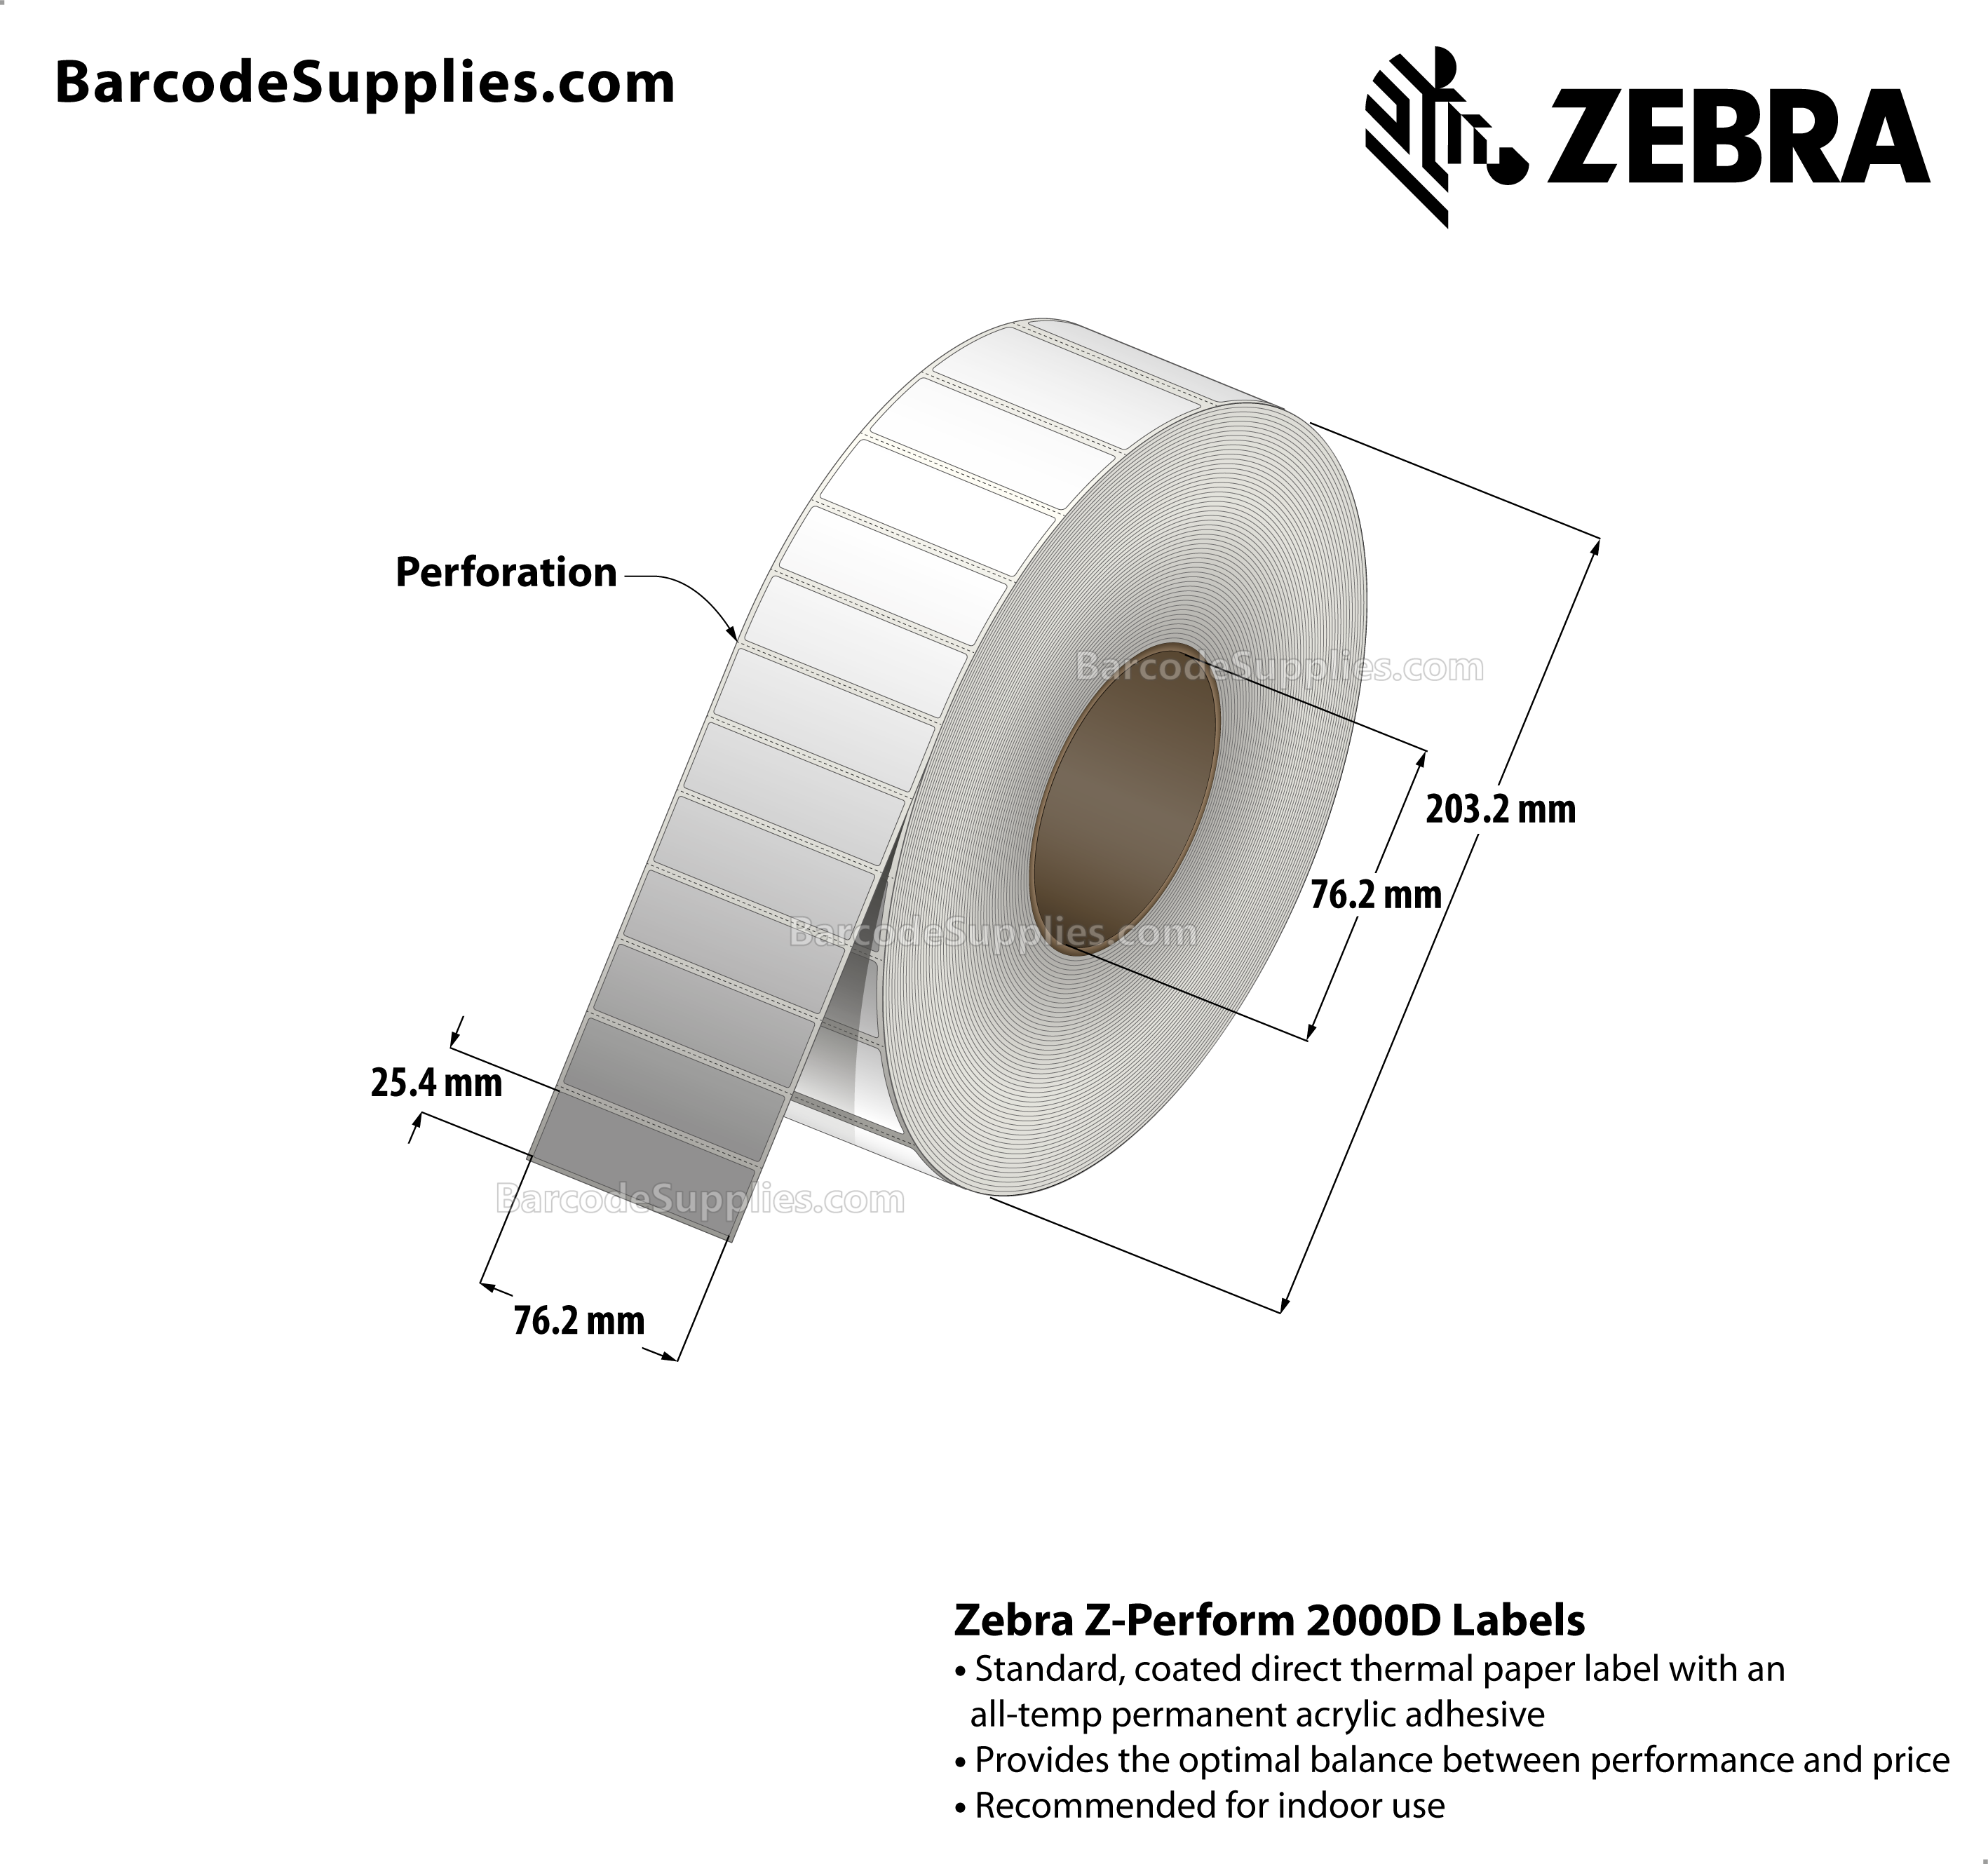 3 x 1 Direct Thermal White Z-Perform 2000D Labels With All-Temp Adhesive - Perforated - 5500 Labels Per Roll - Carton Of 6 Rolls - 33000 Labels Total - MPN: 10000296